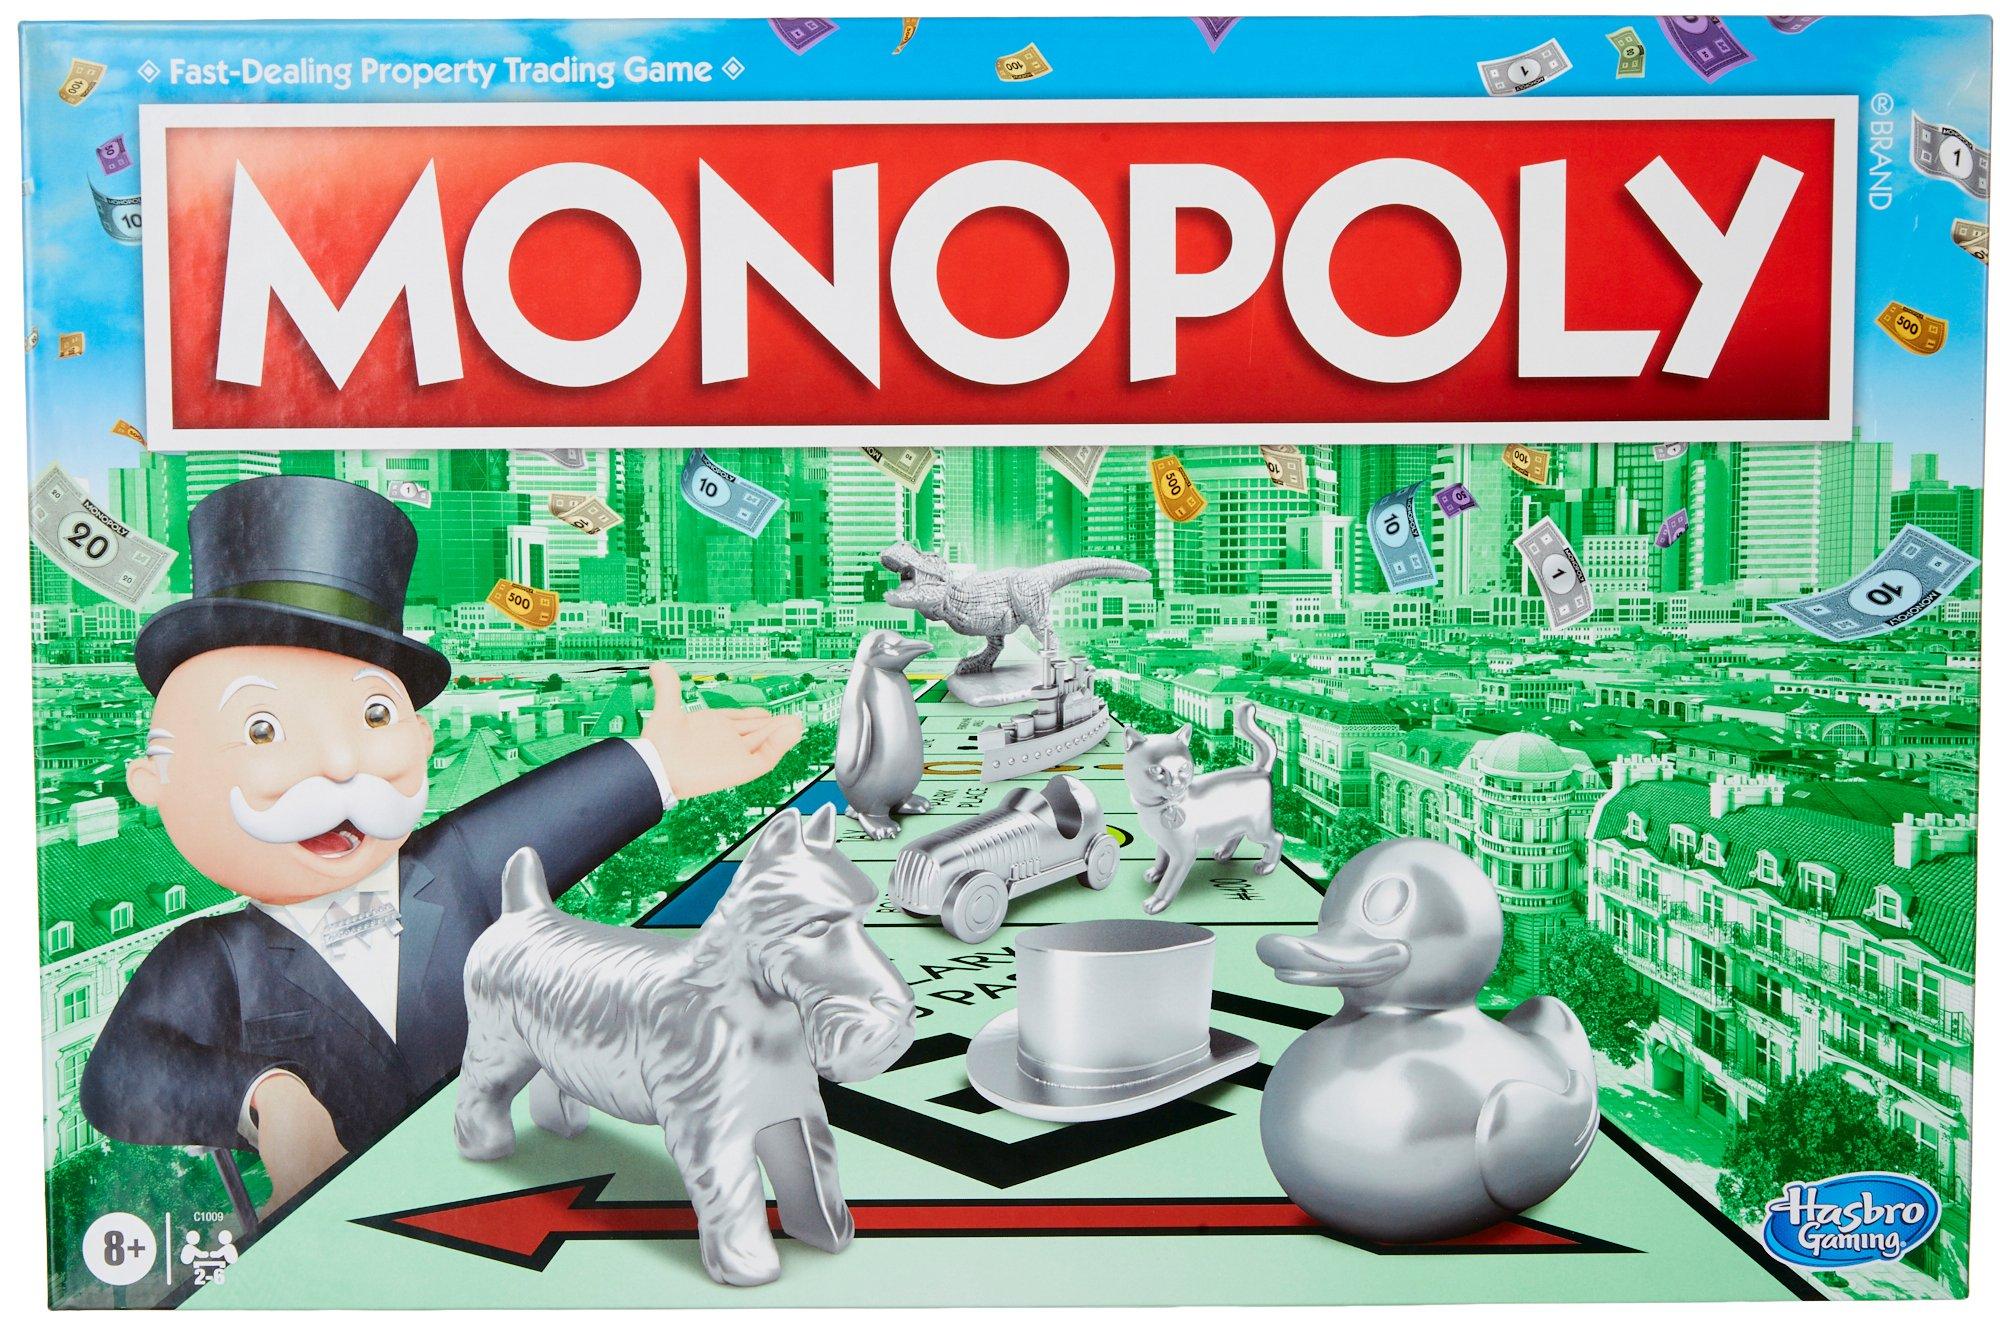 C1009 Monopoly Family Board Game  Playset